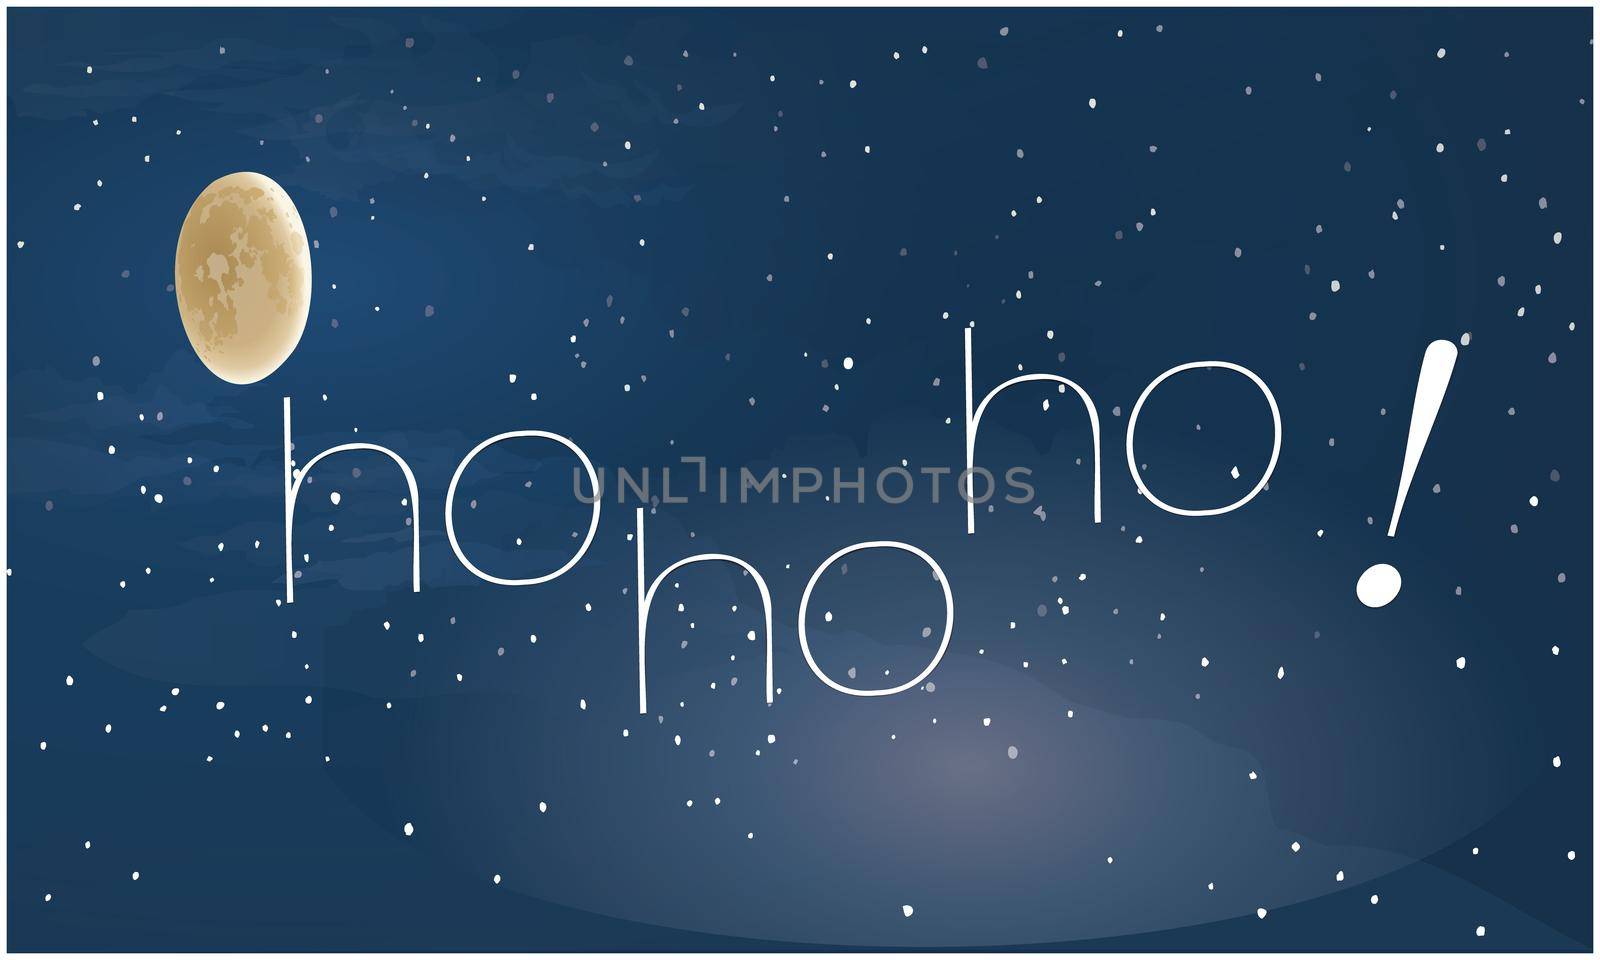 Christmas Illustration on abstract moon and stars background